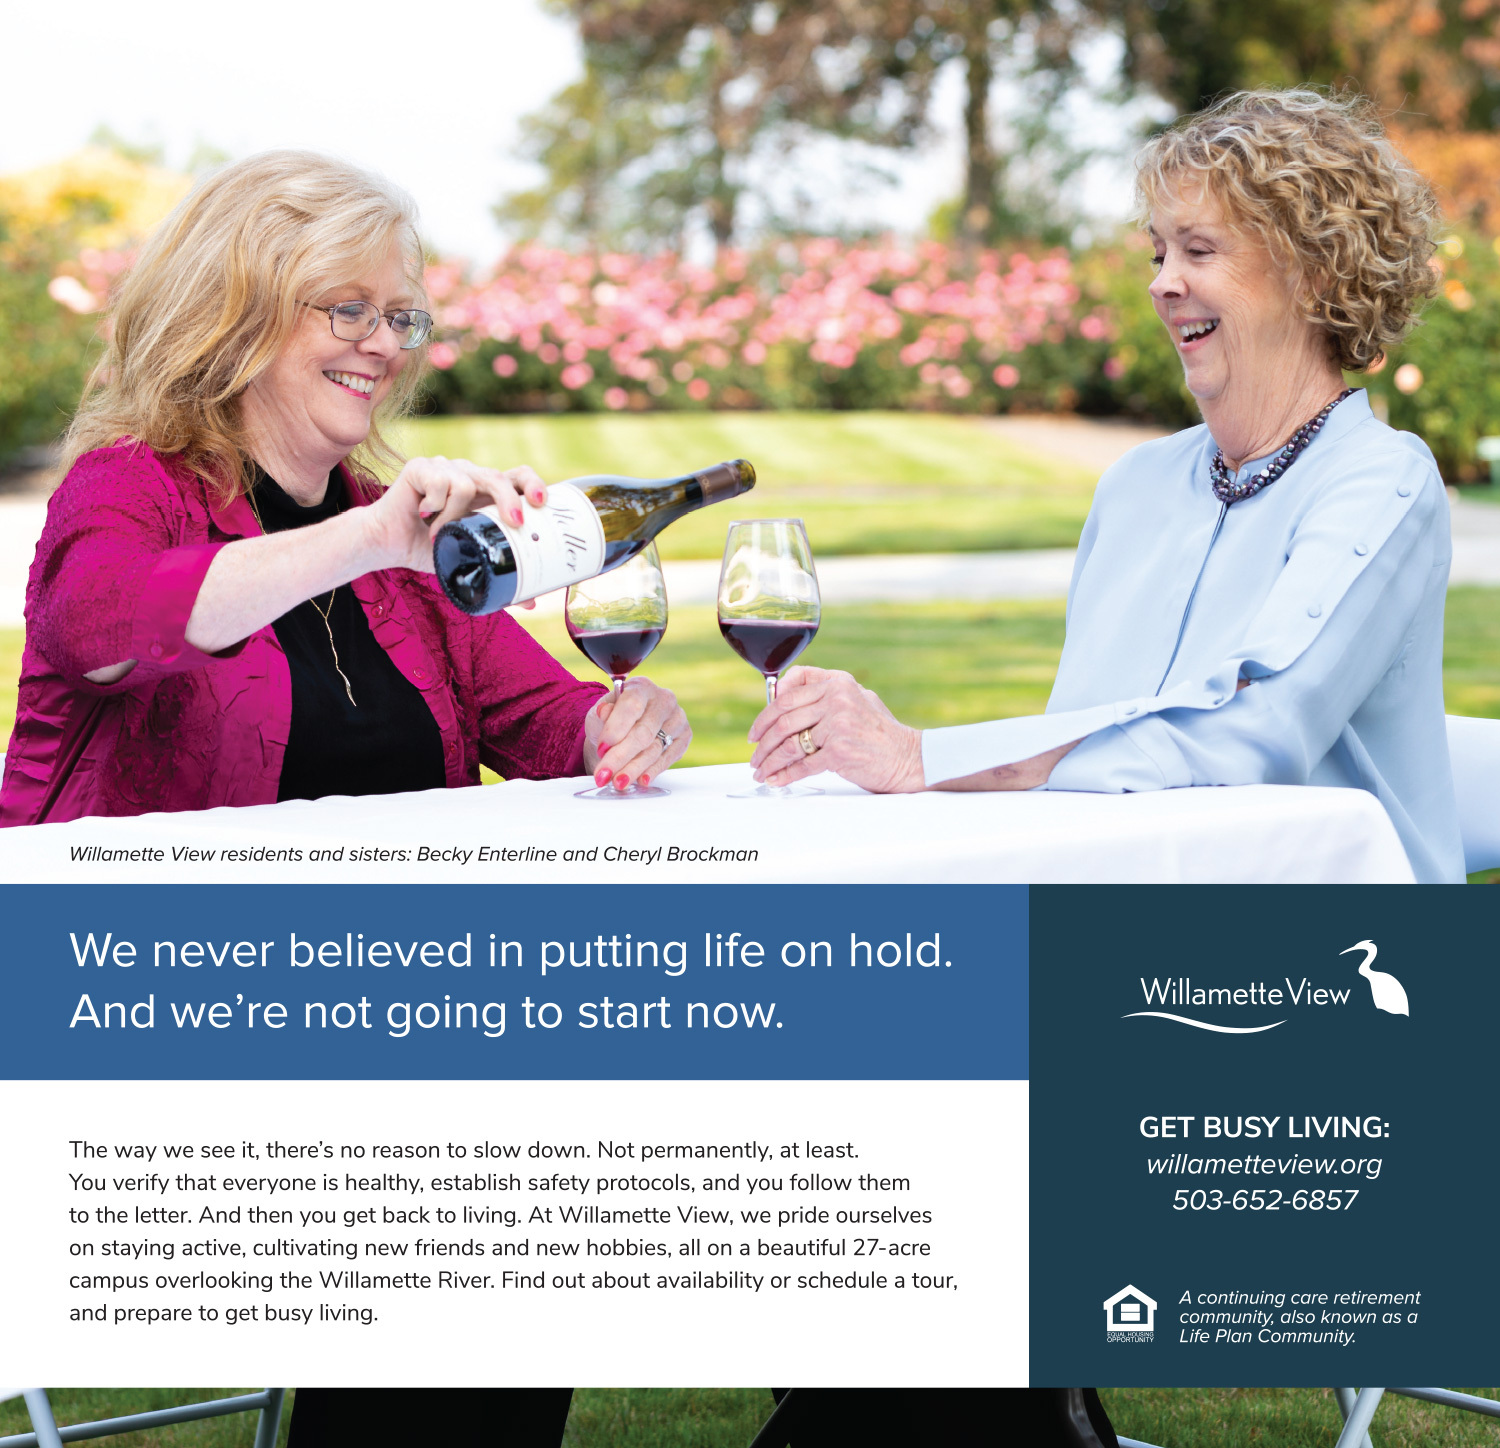 Image of two women - Willamette View residents and real-life sisters - sitting outside and enjoying a bottle of wine together.